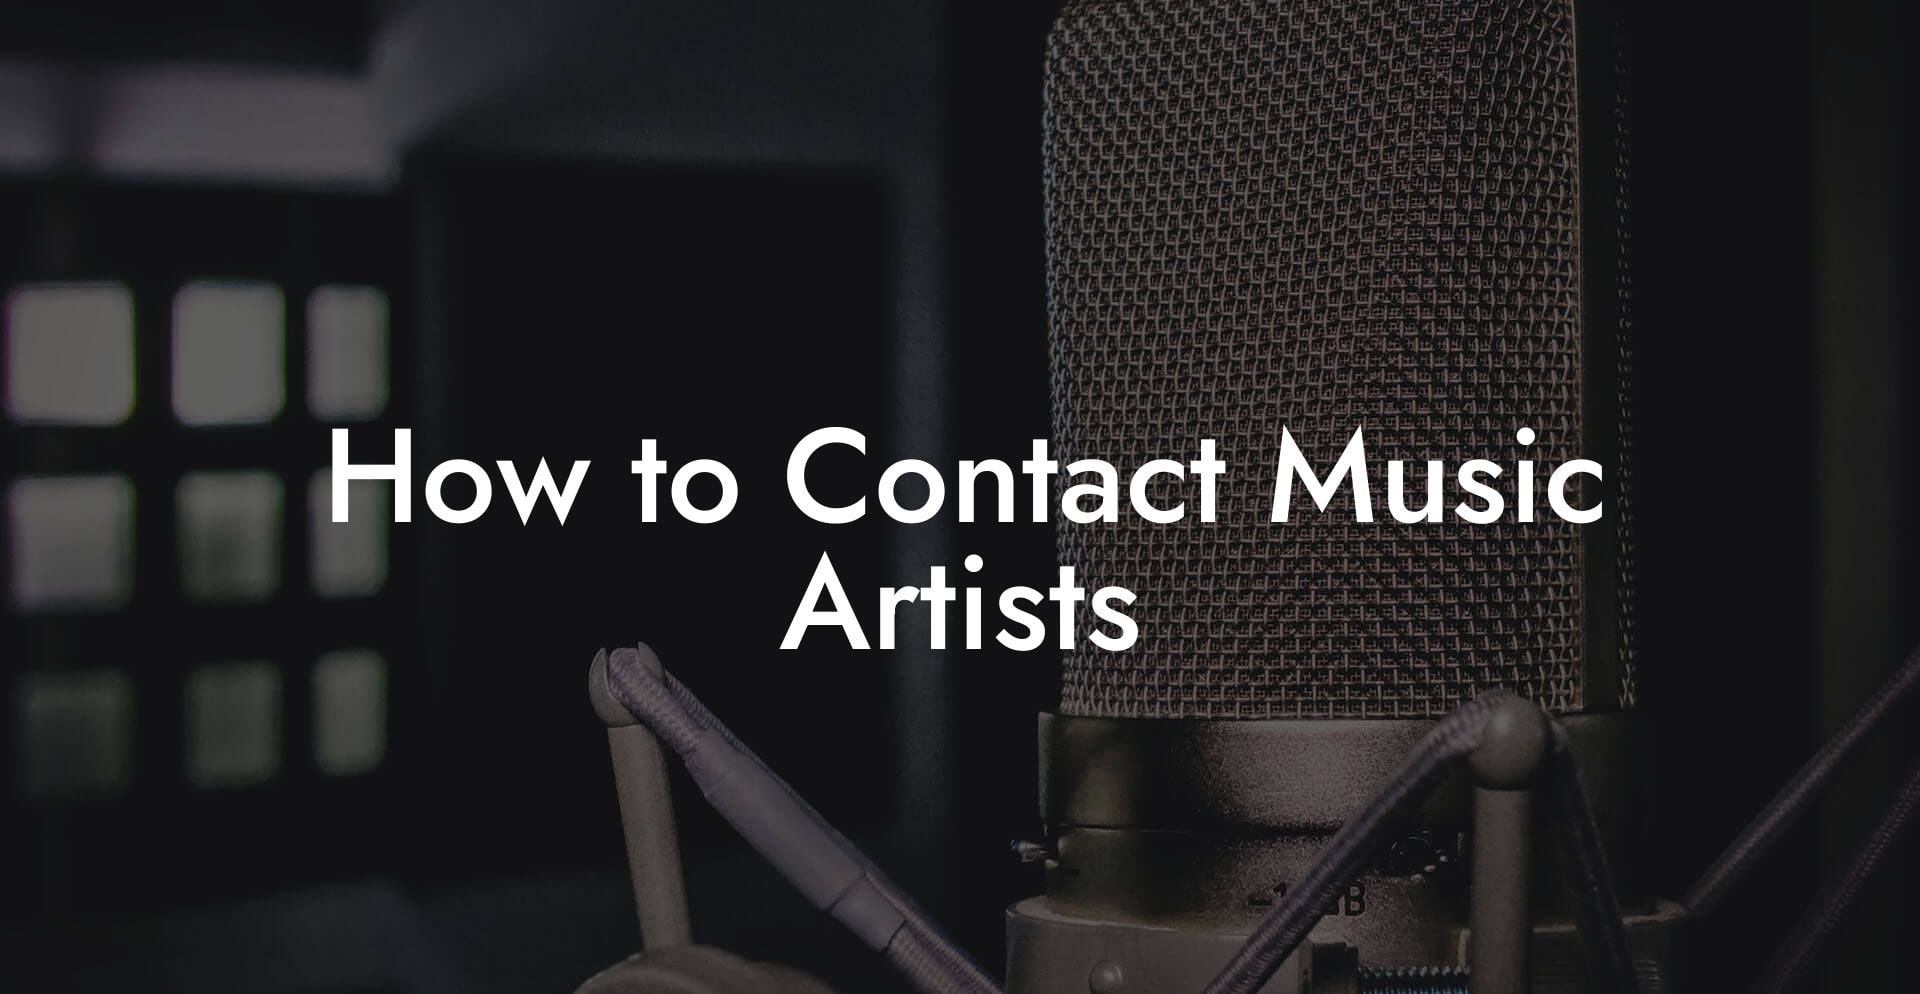 How to Contact Music Artists